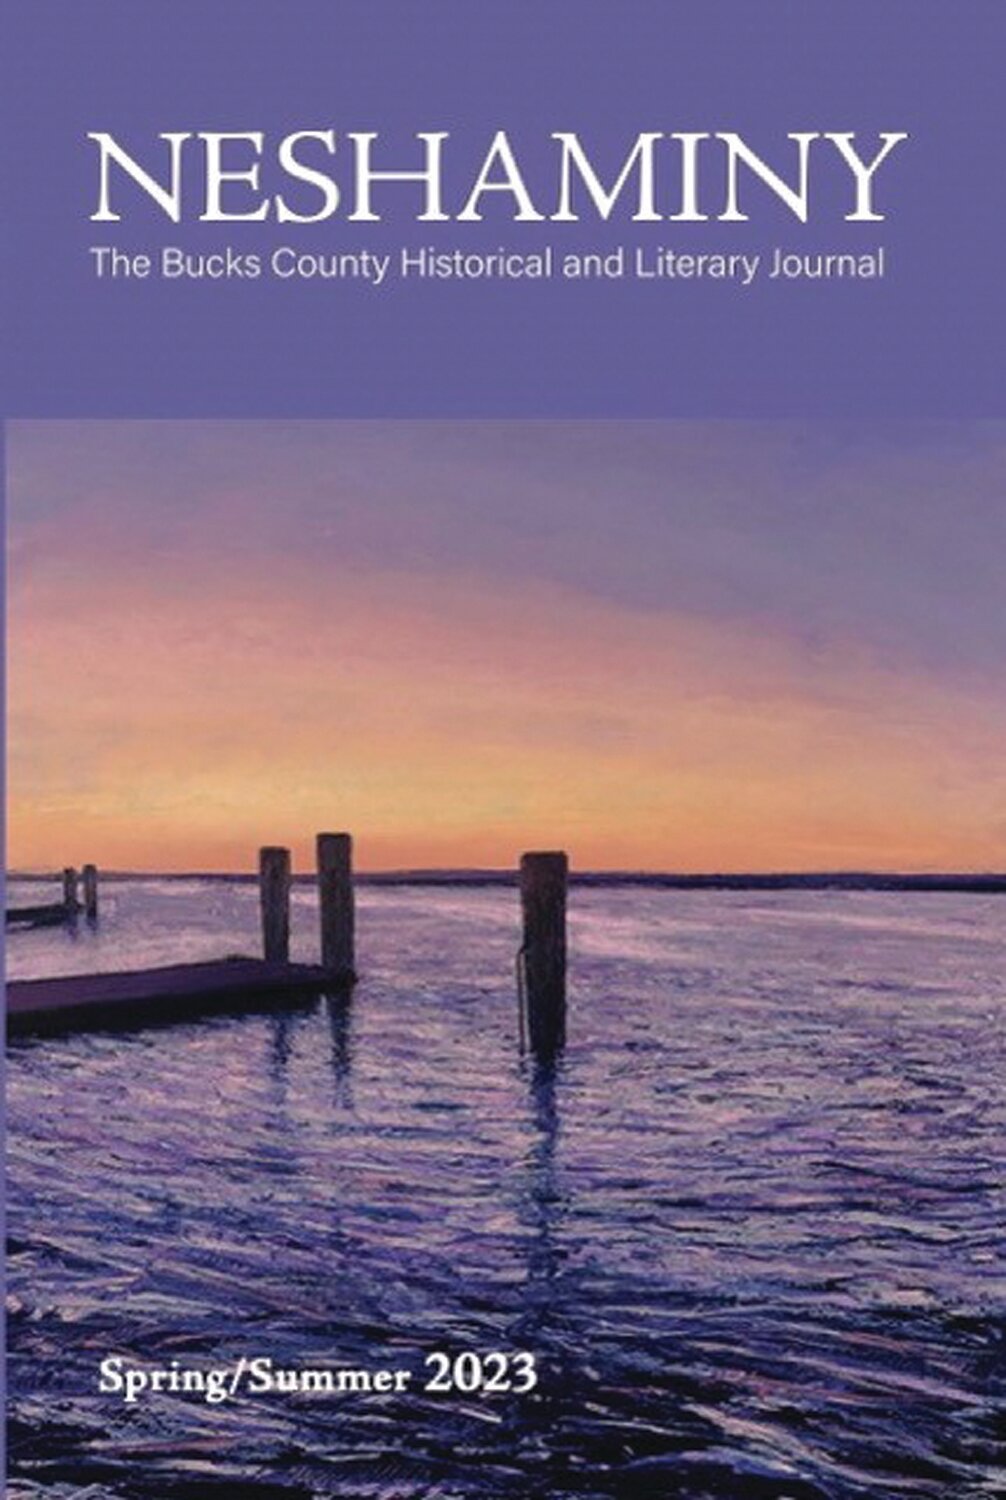 The Spring/Summer 2023 edition of “Neshaminy: The Bucks County Historical and Literary Journal” published by the Bucks County Writers Workshop and the Doylestown Historical Society, can be obtained at the DHS, local bookstores and on Amazon.